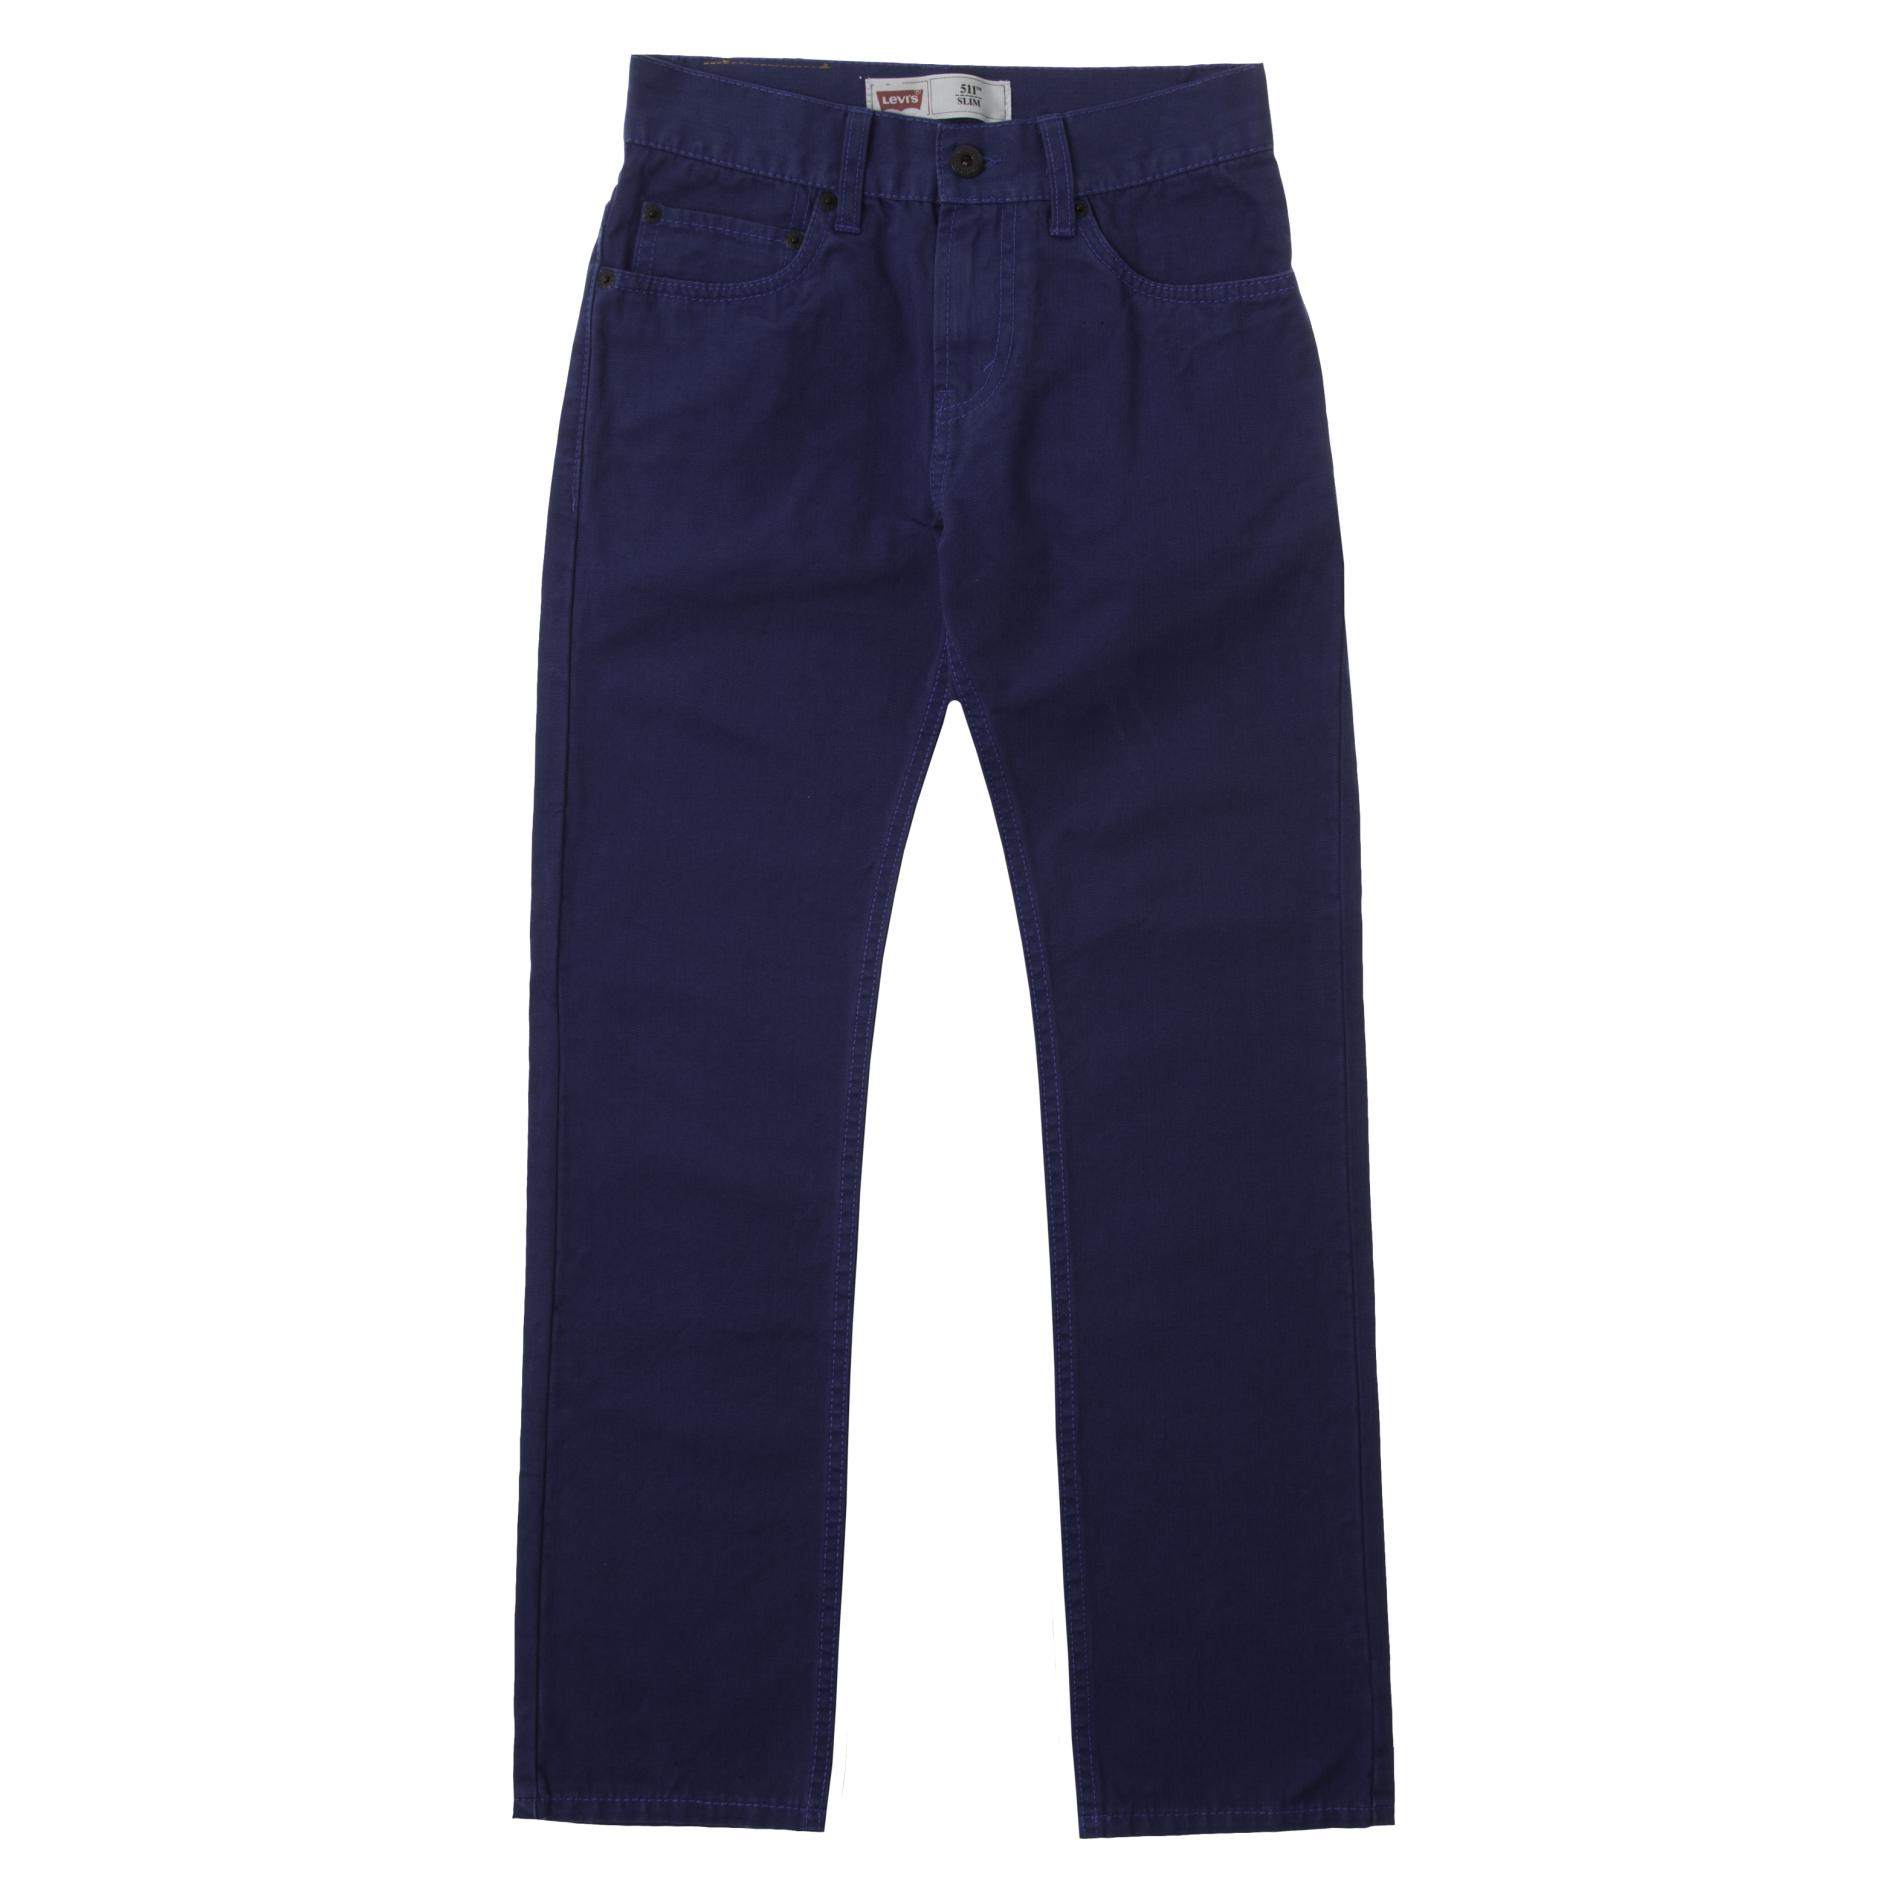 Levi's Boy's 511 Colored Slim Fit Trousers